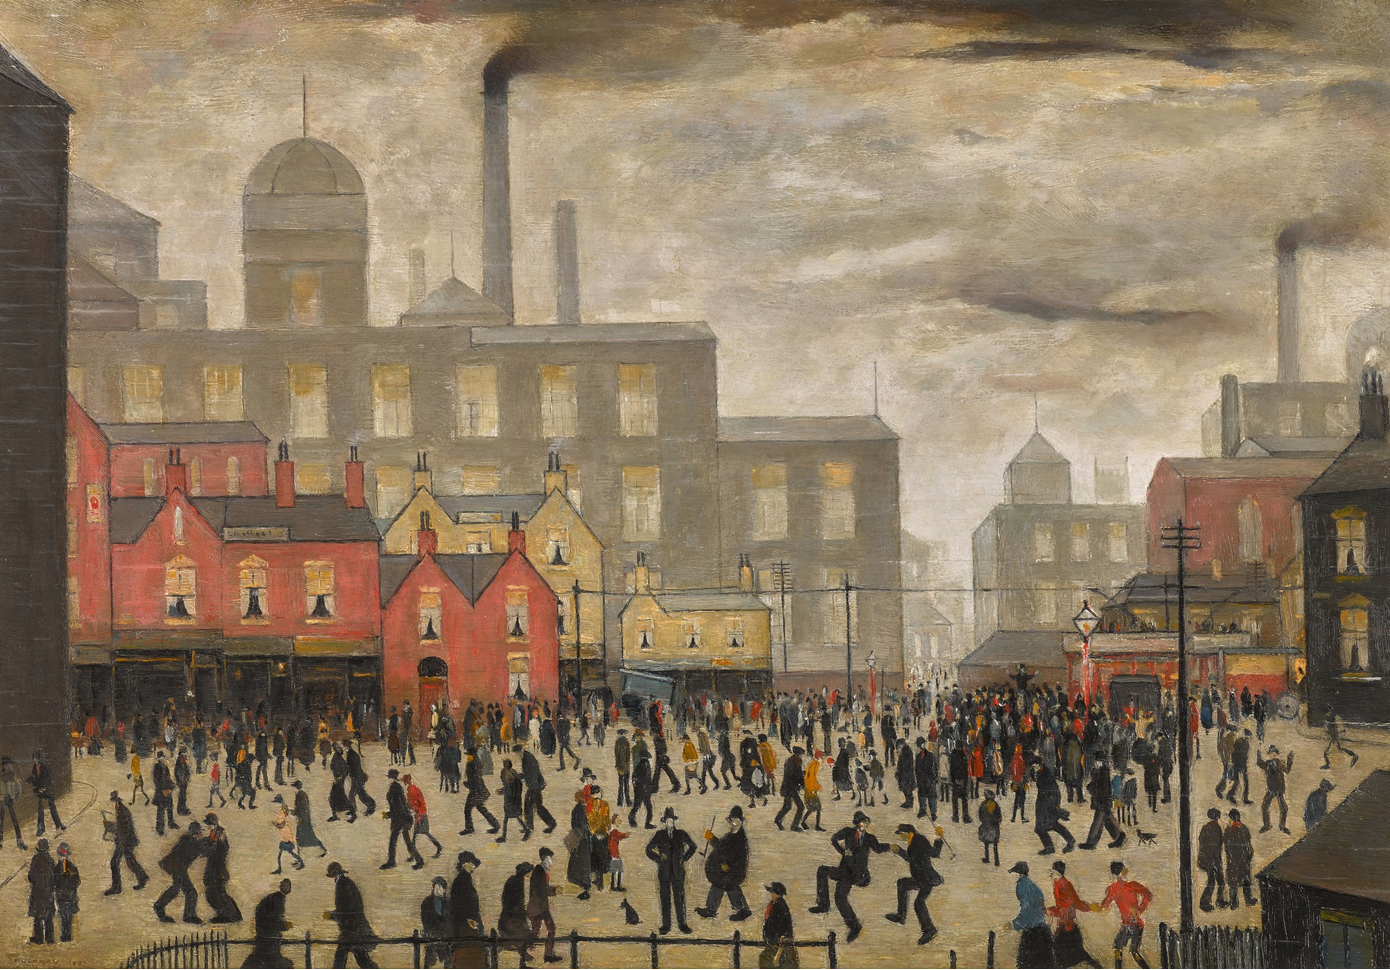 A Town Square (1927) by Laurence Stephen Lowry (1887 - 1976), English artist.